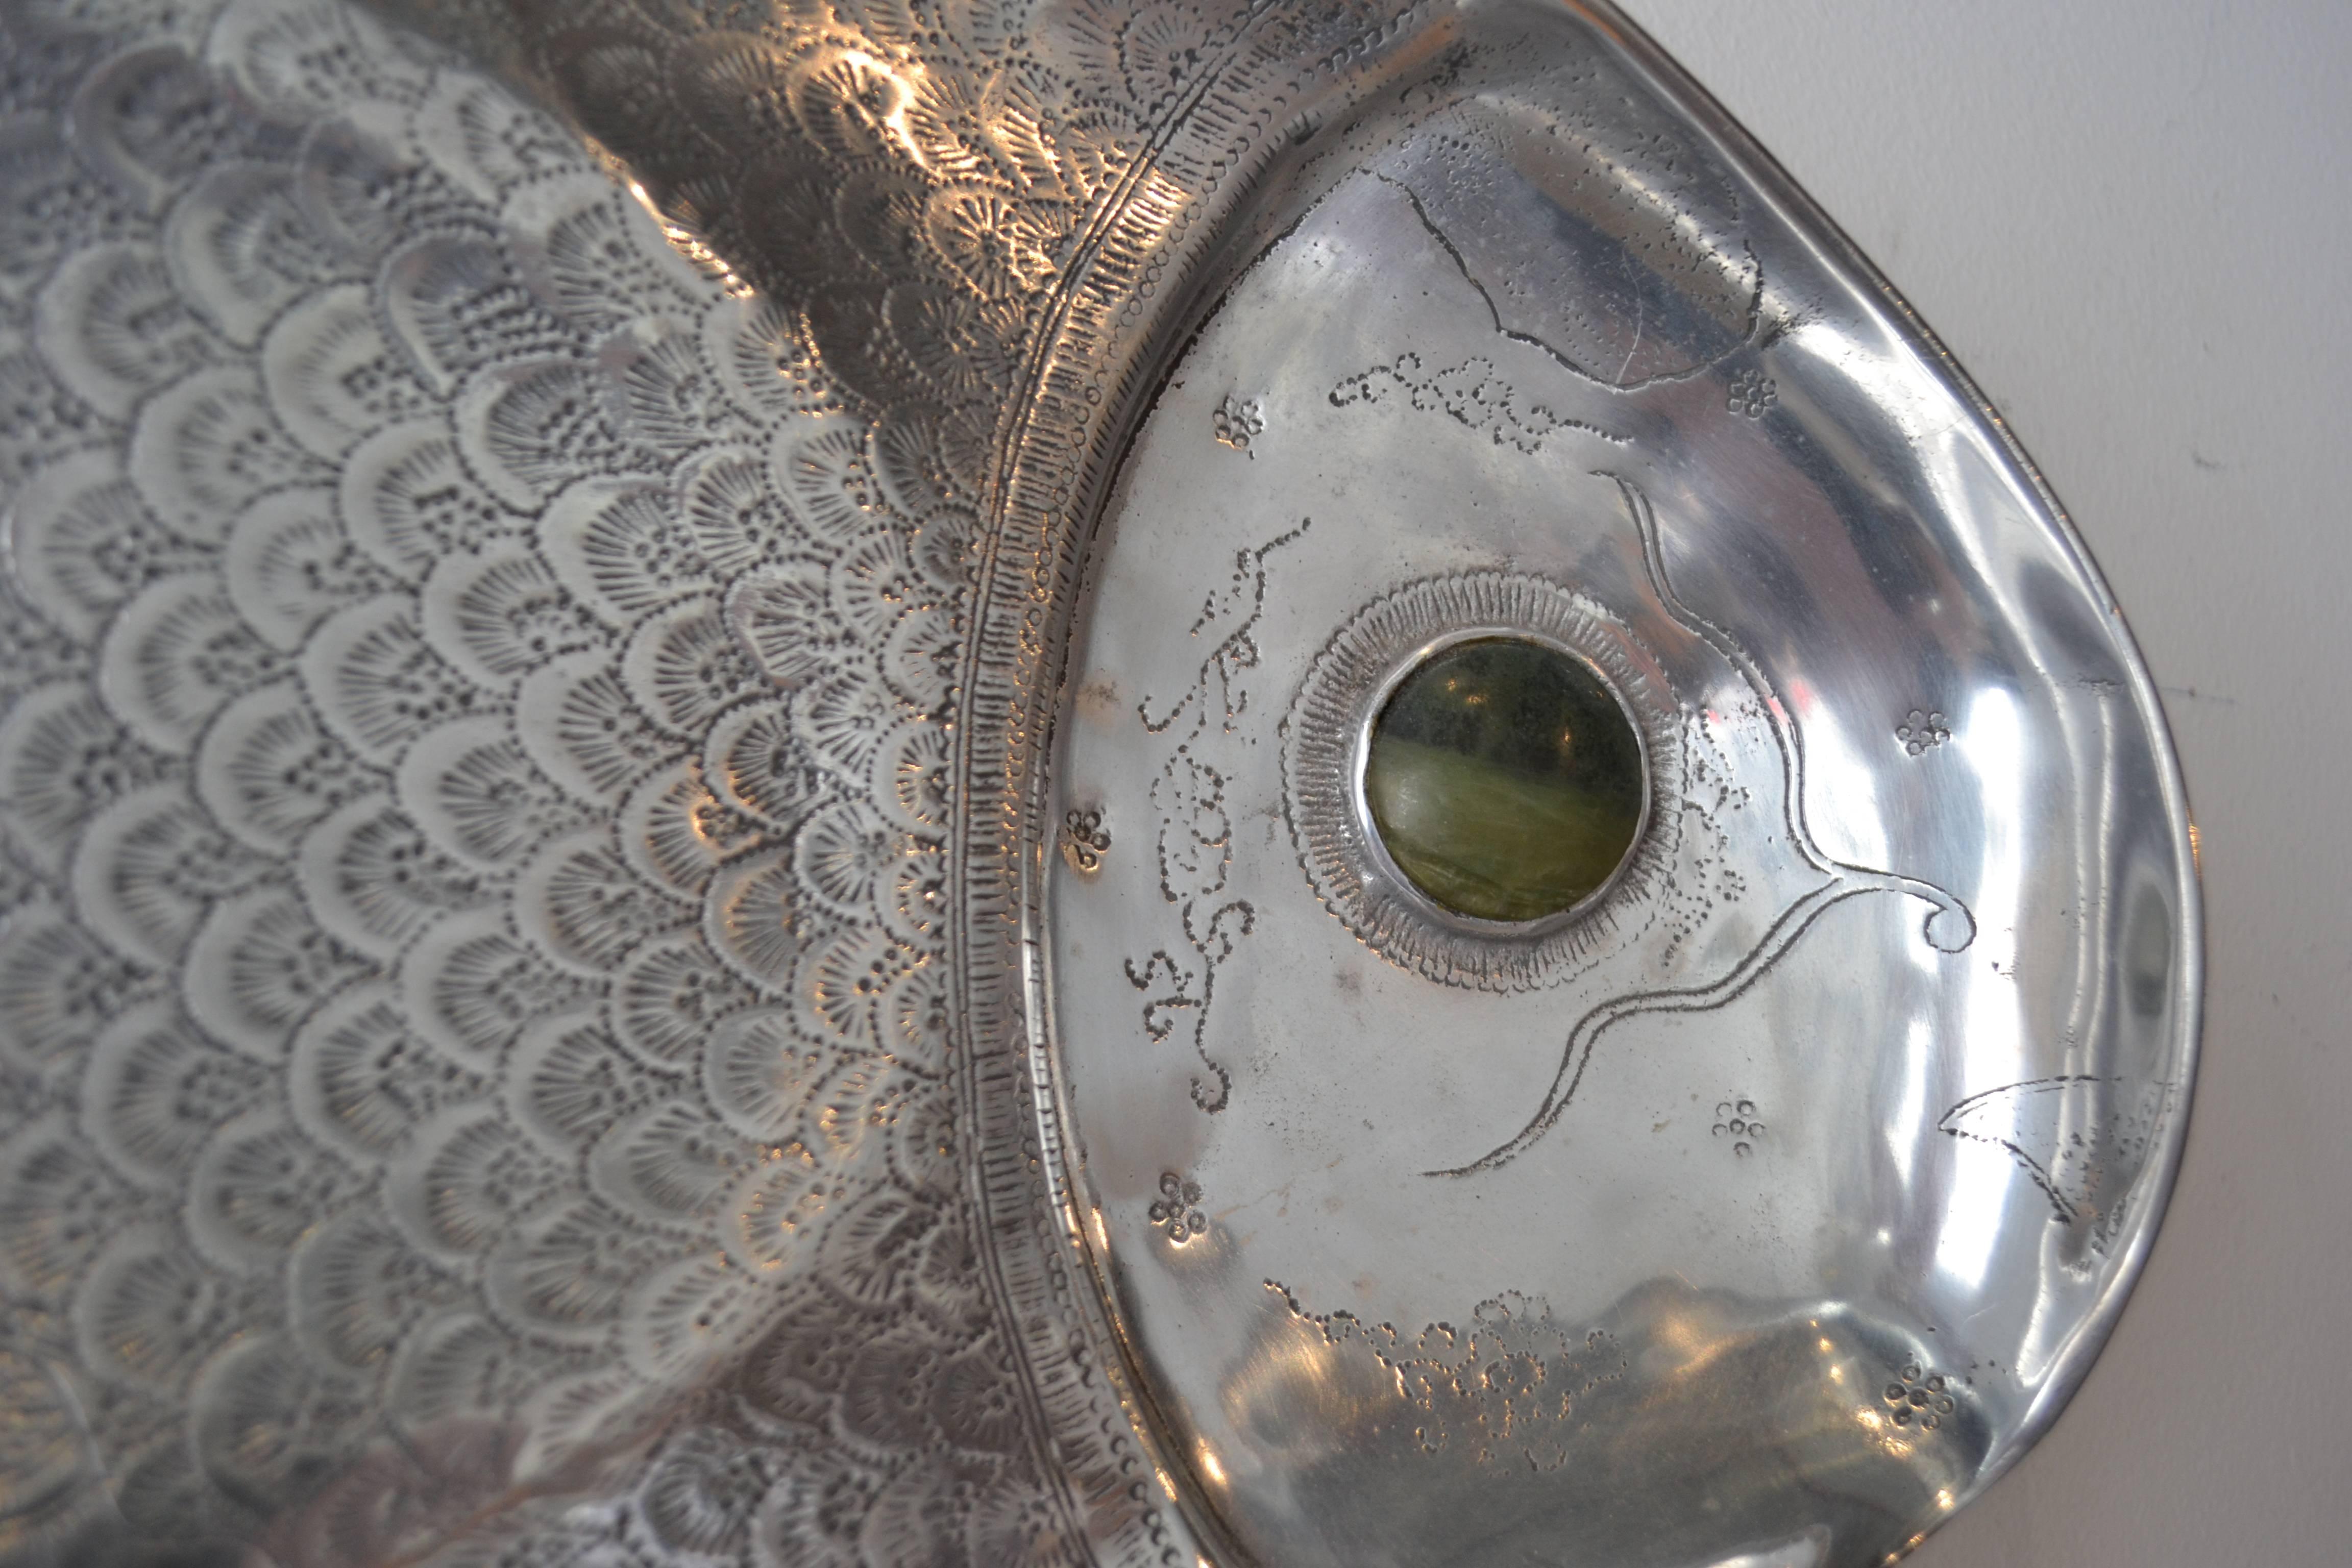 Gorgeous polished silver aluminium fish tray or platter by San Fransisco designer Arthur Court. Beautifully designed with detailed scales and fins and a green jade eye. Mid-Century Modern, 1975.